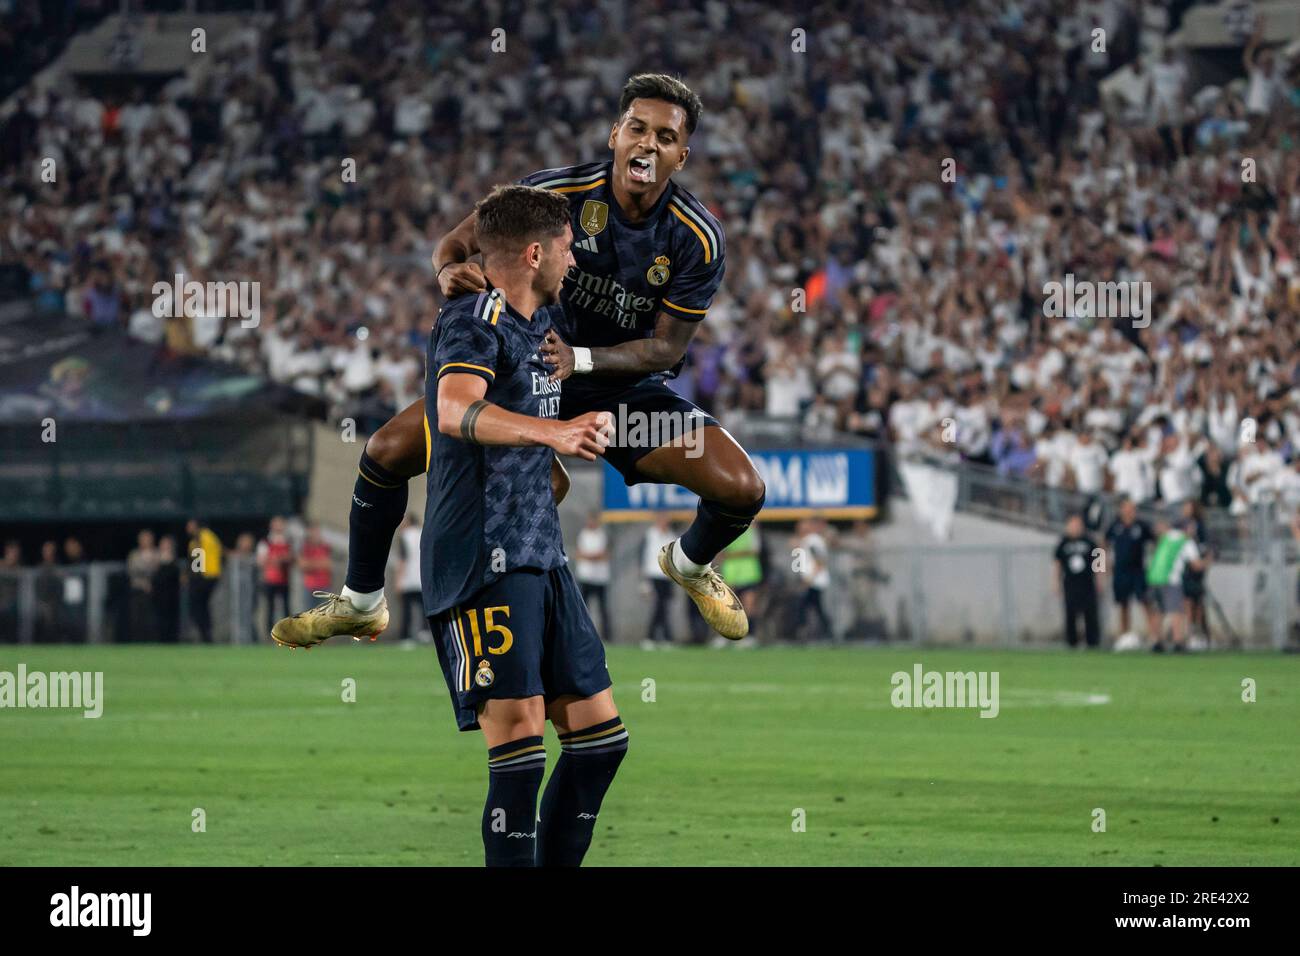 Real Madrid forward Rodrygo Silva (11) celebrates with midfielder Federico Valverde (15) after he scored a goal during the Soccer Champions Tour again Stock Photo